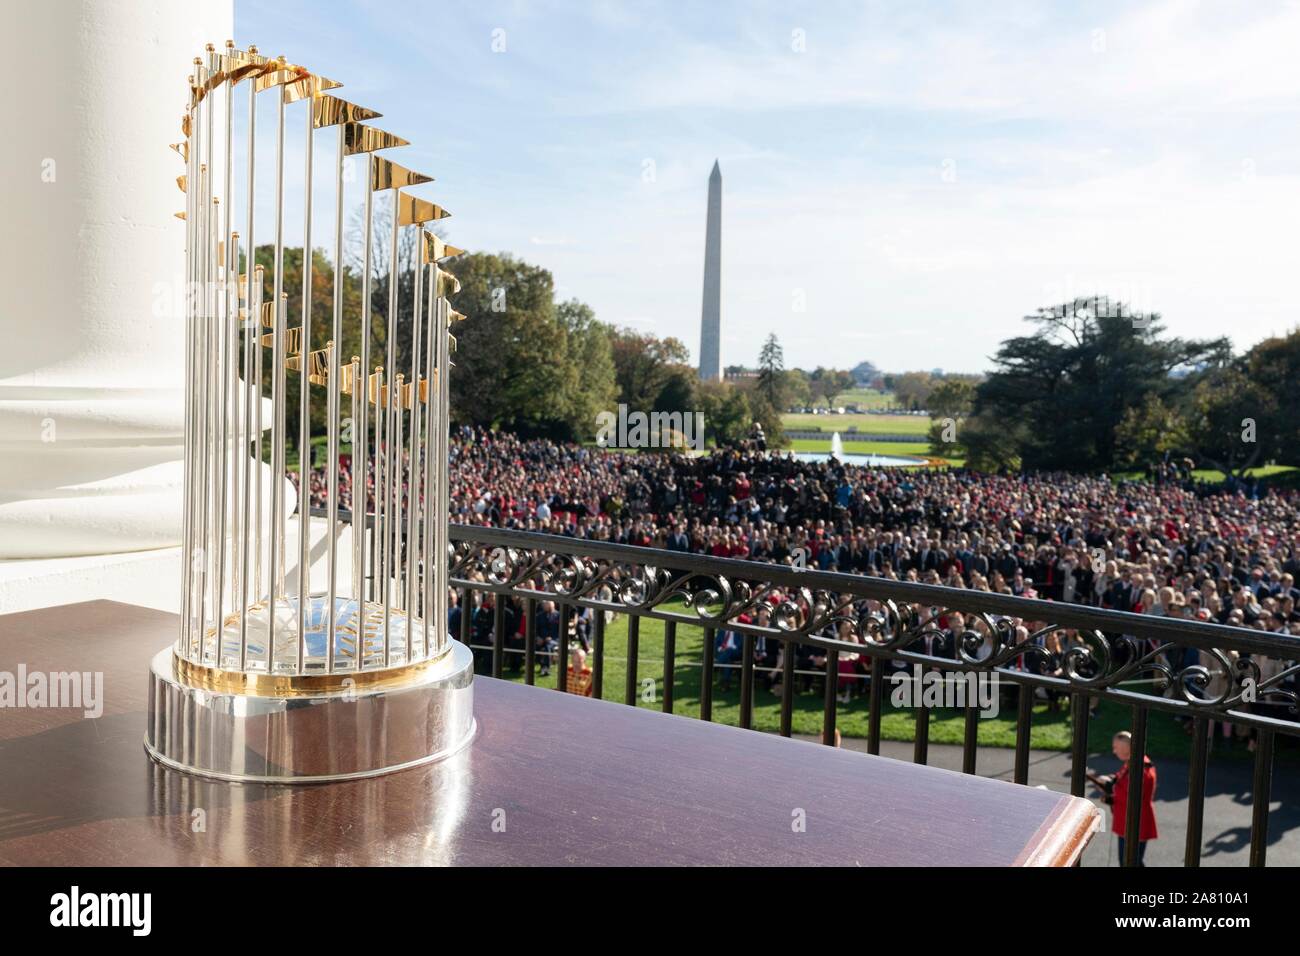 Washington, United States of America. 04 November, 2019. The 2019 Baseball World Series Champion trophy on display at the South Portico balcony of the White House November 4, 2019 in Washington, DC.  U.S. President Donald Trump hosted the Washington Nationals baseball team to honor their victory.  Credit: Shealah Craighead/White House Photo/Alamy Live News Stock Photo